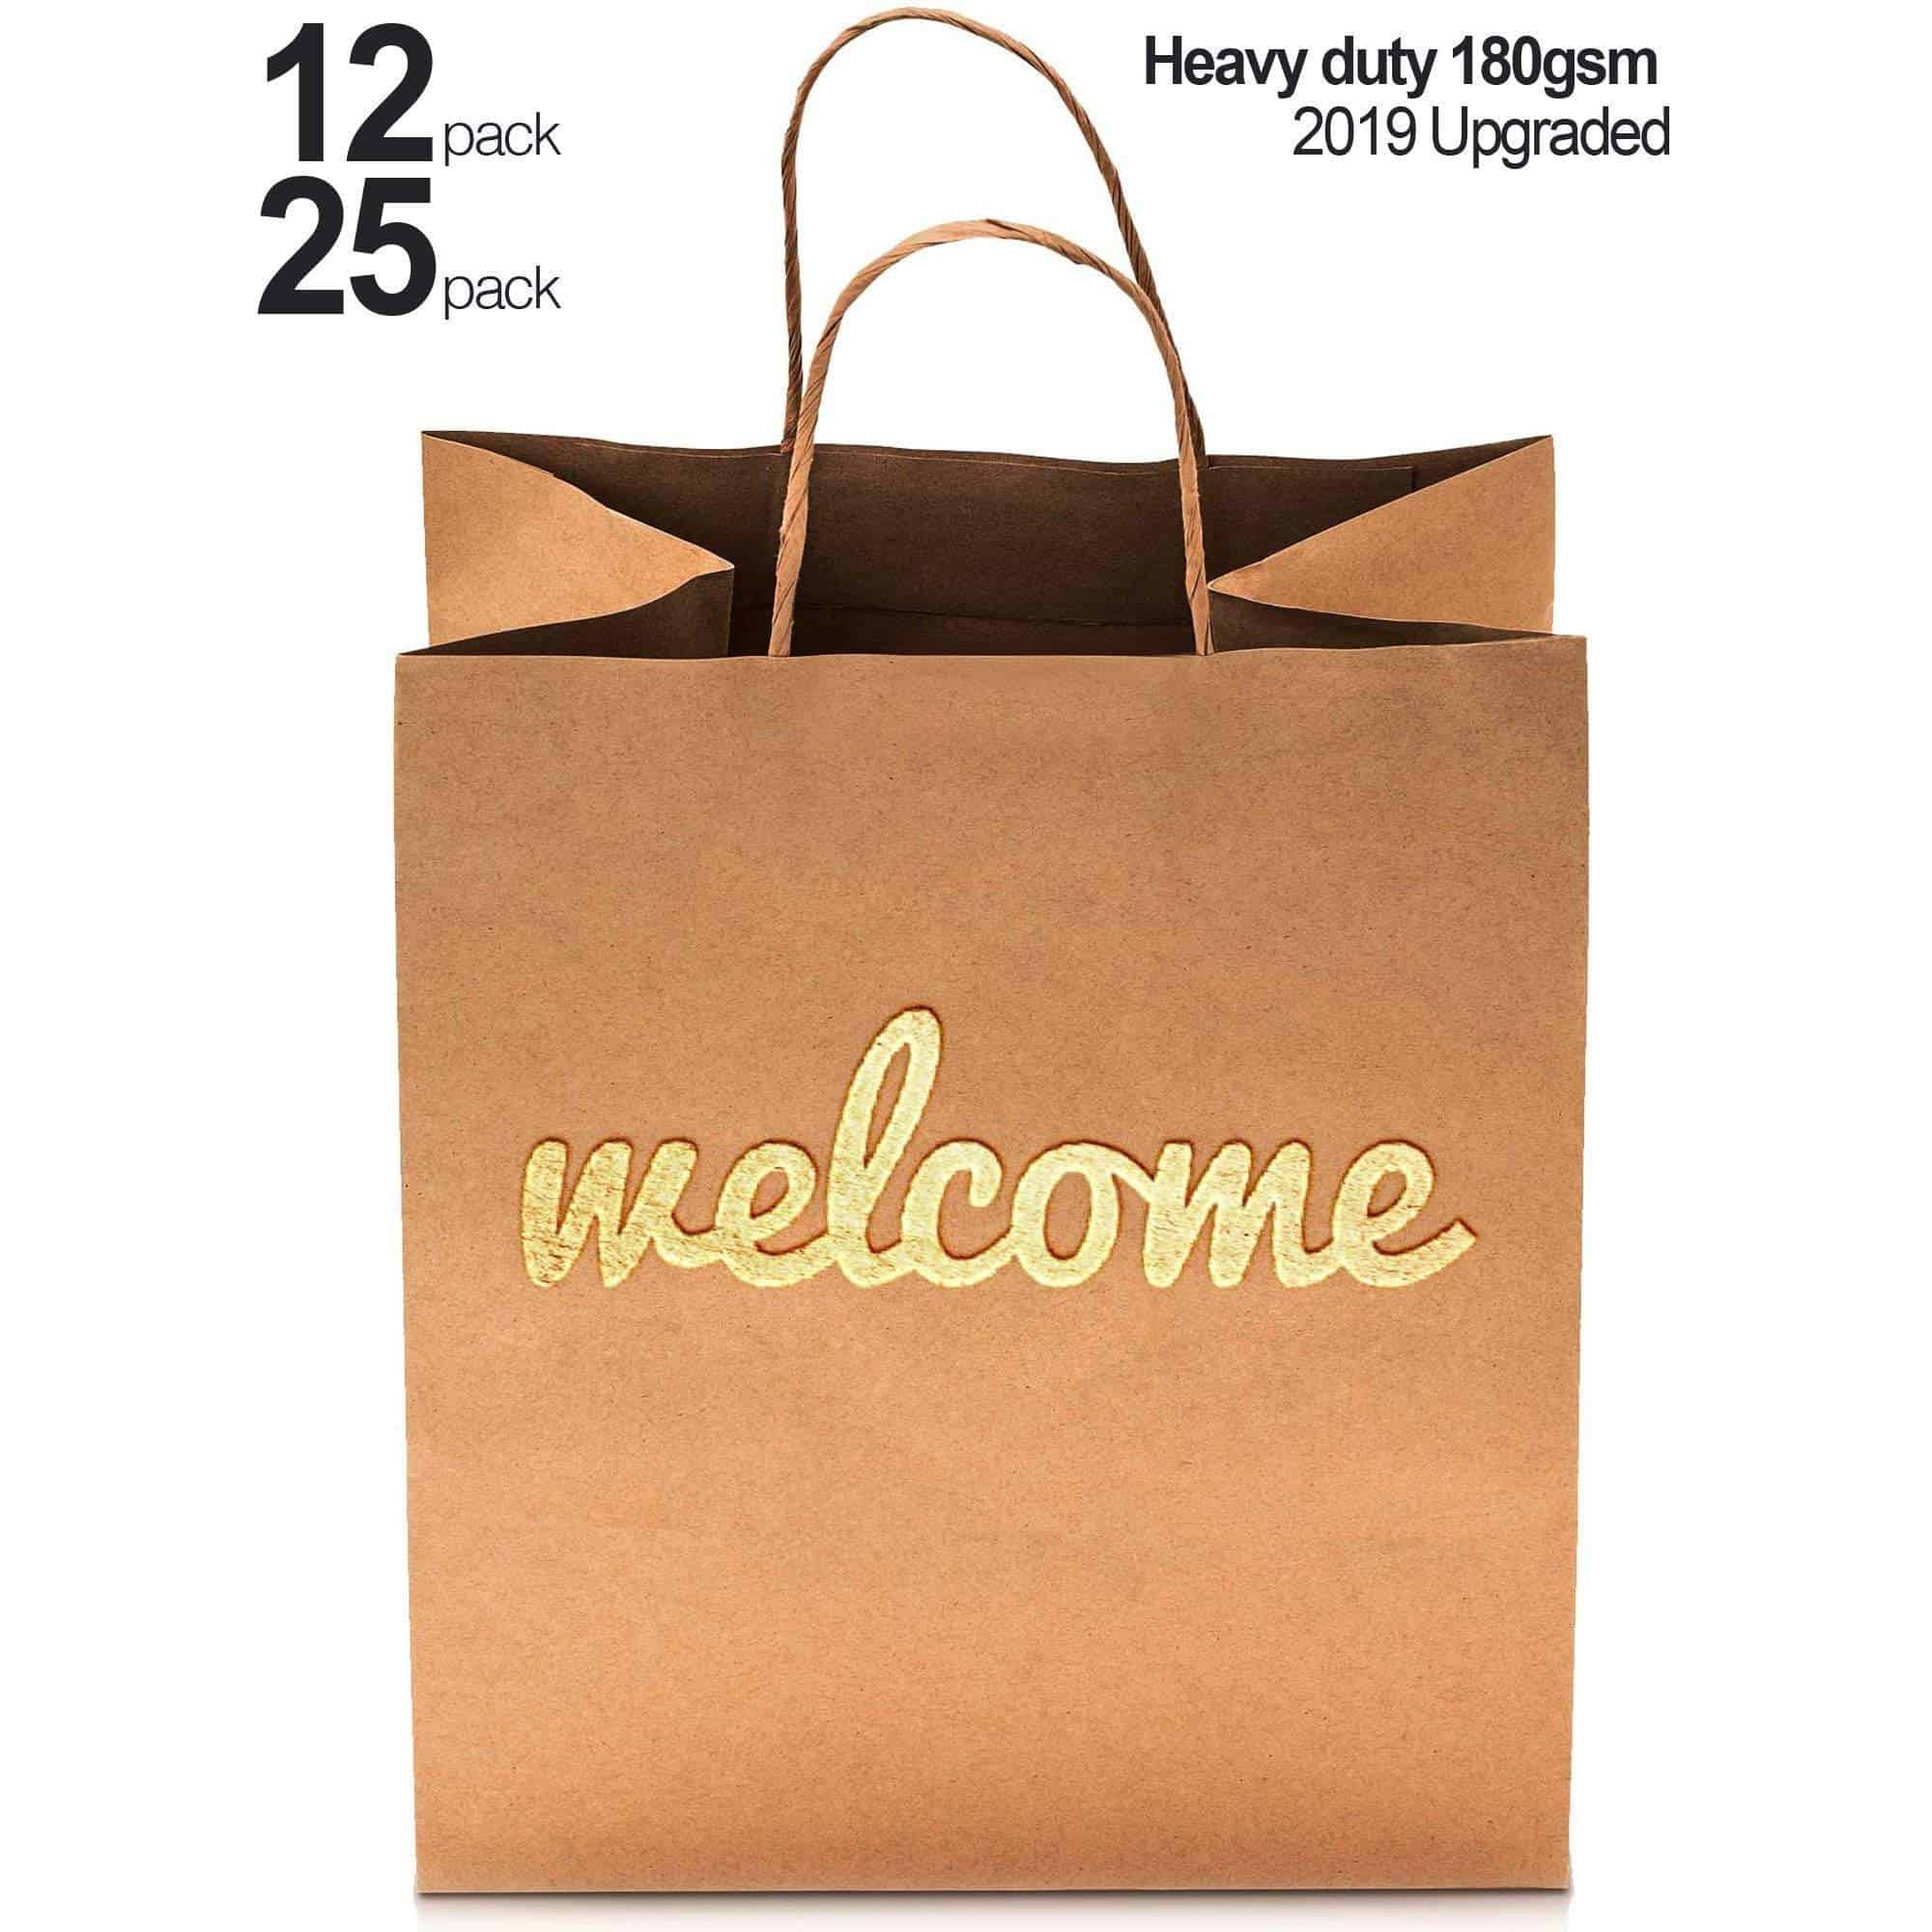  25 Pack Wedding Gift Bag with Tissue Paper - Gold Wedding Gift  Bags for Hotel Guests, Welcome Bags for Wedding Guests Bulk, Wedding Gift  Bags for Hotel Guests, Wedding Welcome Bags